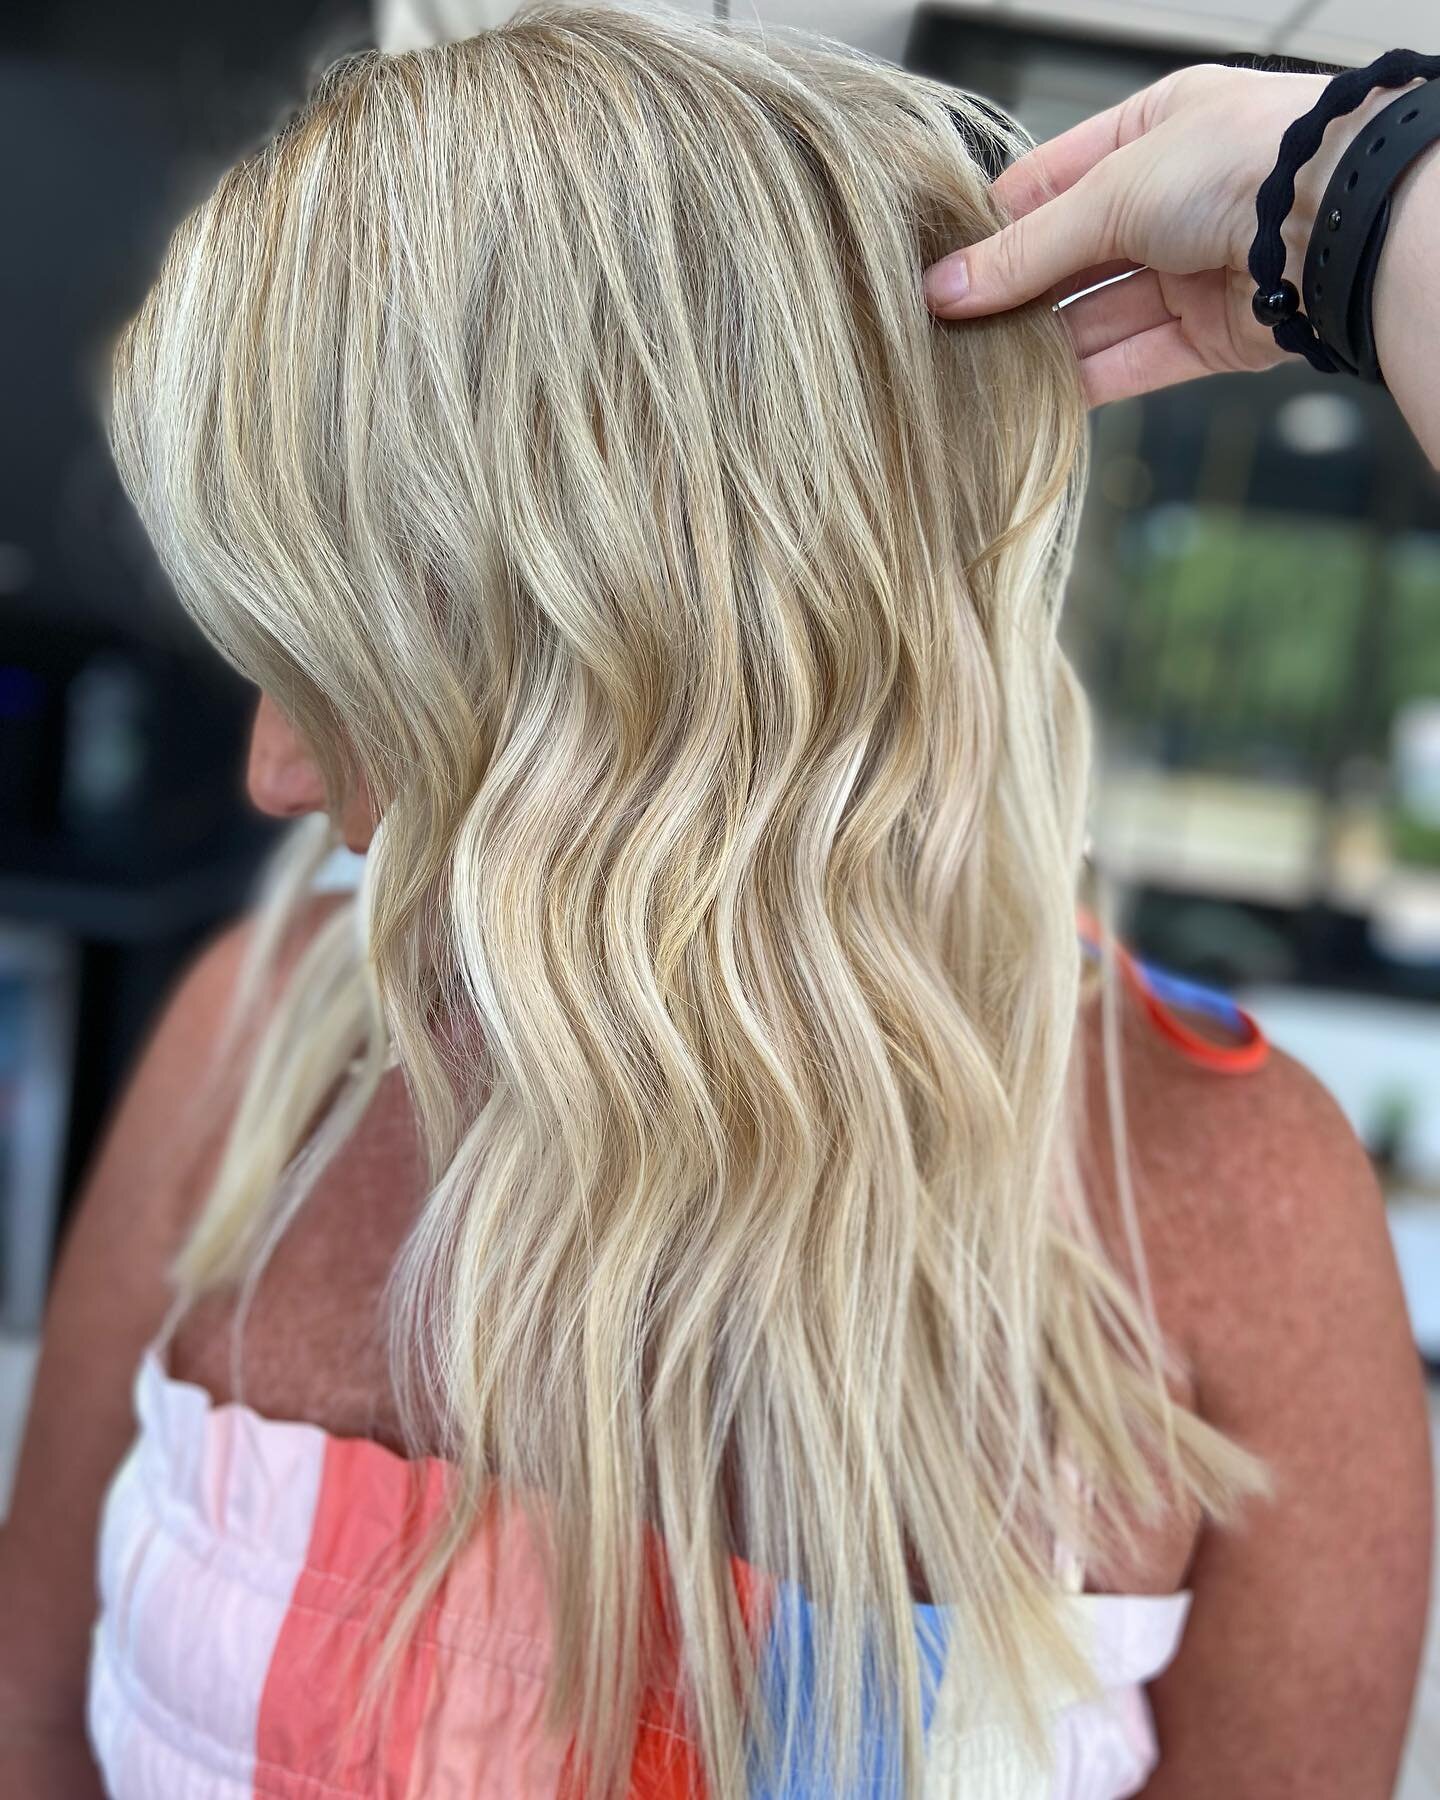 HELLO BLONDIE!!! ☀️ 
This beauty got a fresh set of IBE Extensions. 
2 rows &amp; 9 wefts of @jz.styles @jzstyles.co for length and fullness. 
color by @jen.thestandardhairco